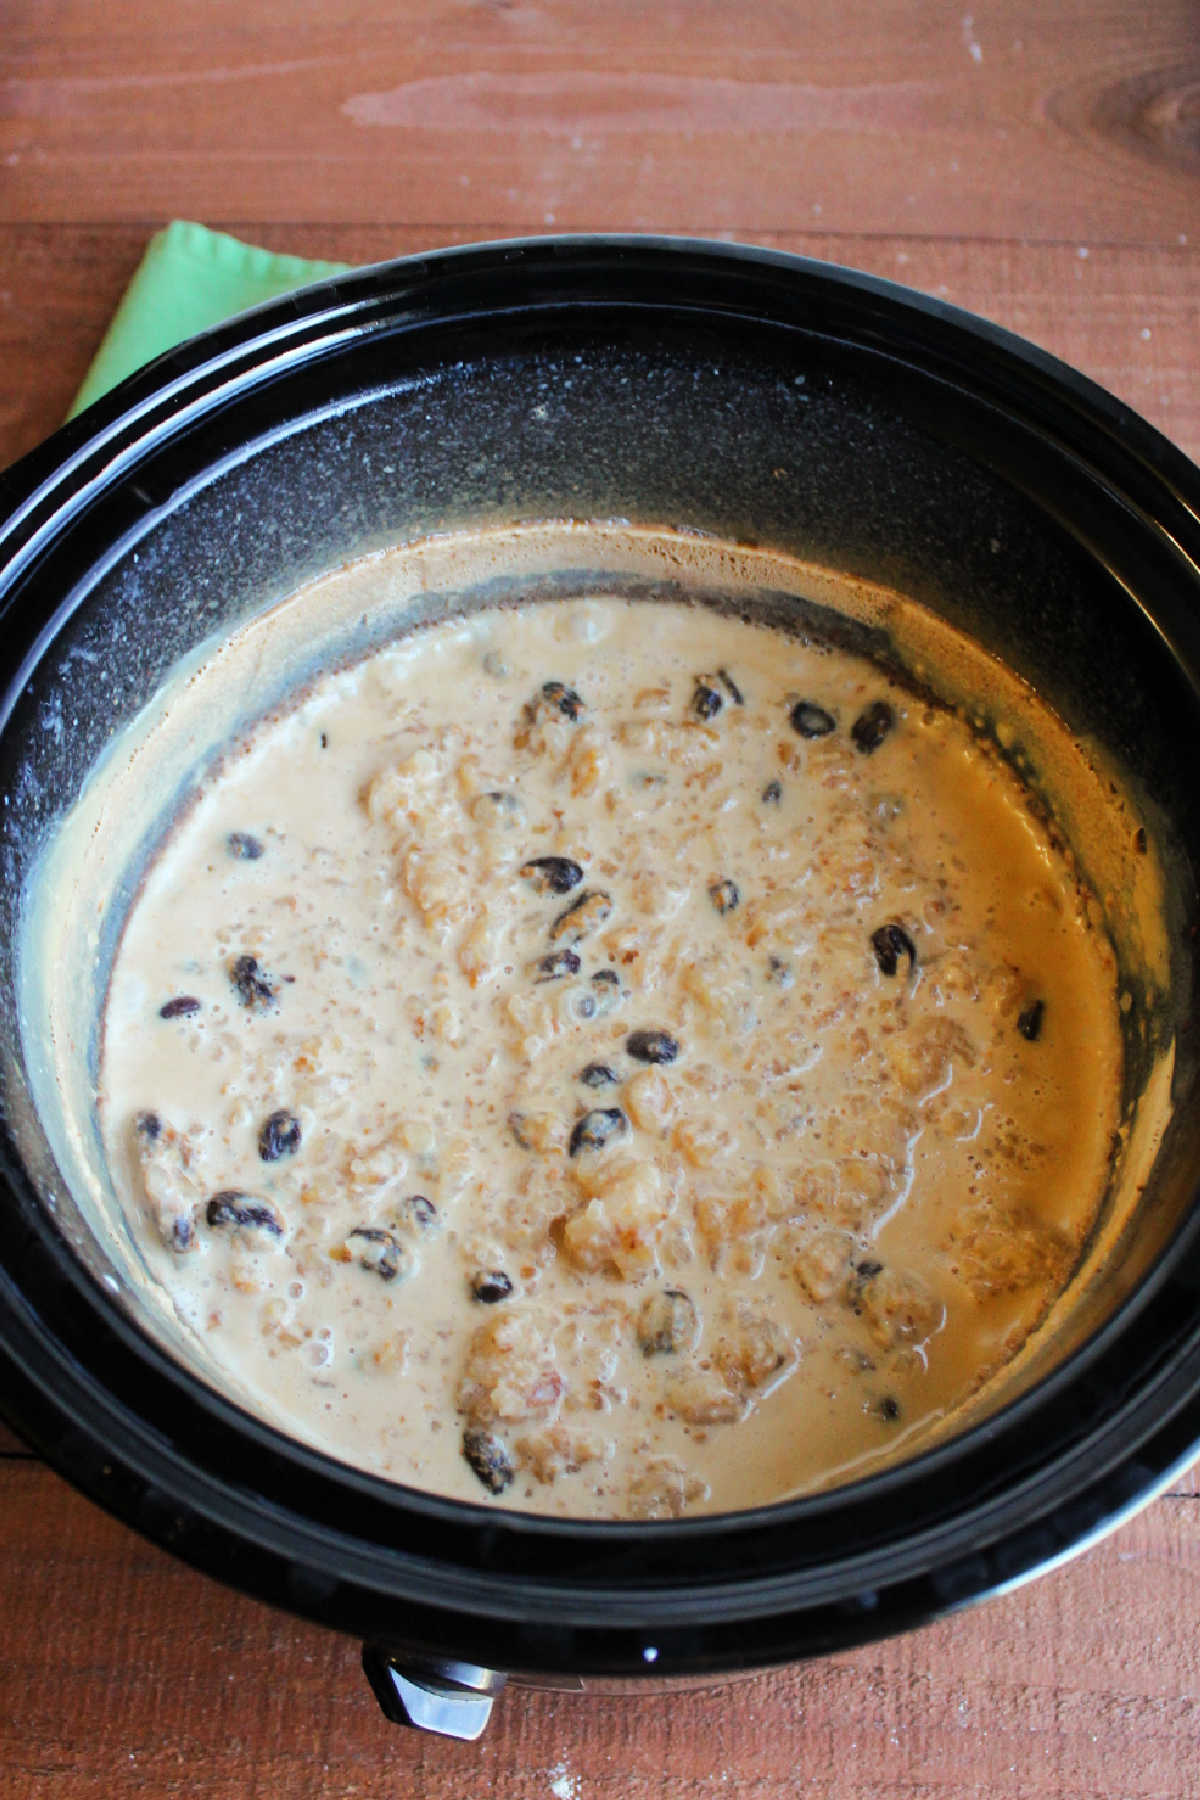 Cooked rice pudding in slow cooker with most of the milk absorbed.